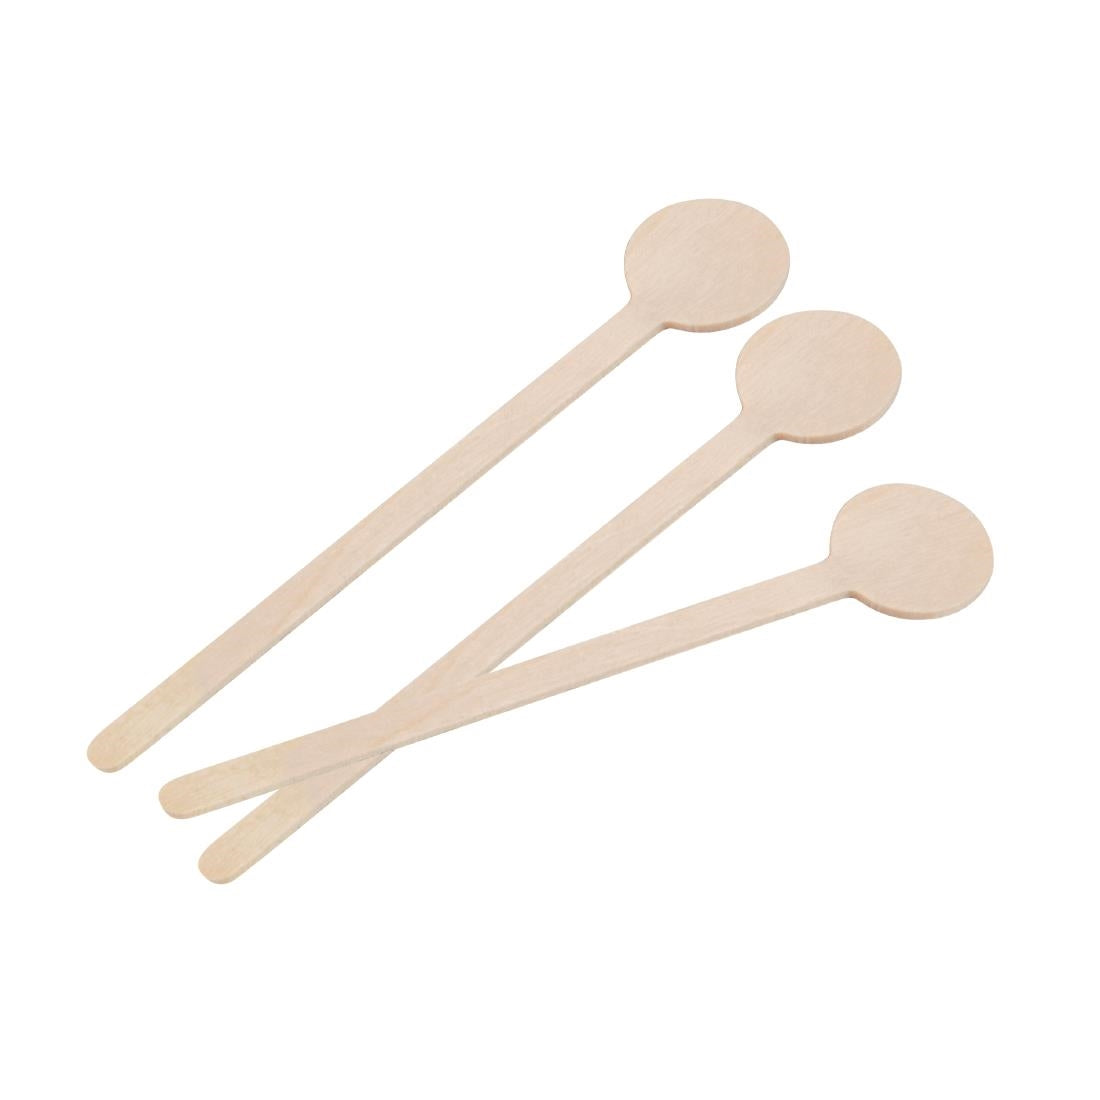 Fiesta Green Biodegradable Wooden Cocktail Stirrers (Pack of 100) JD Catering Equipment Solutions Ltd